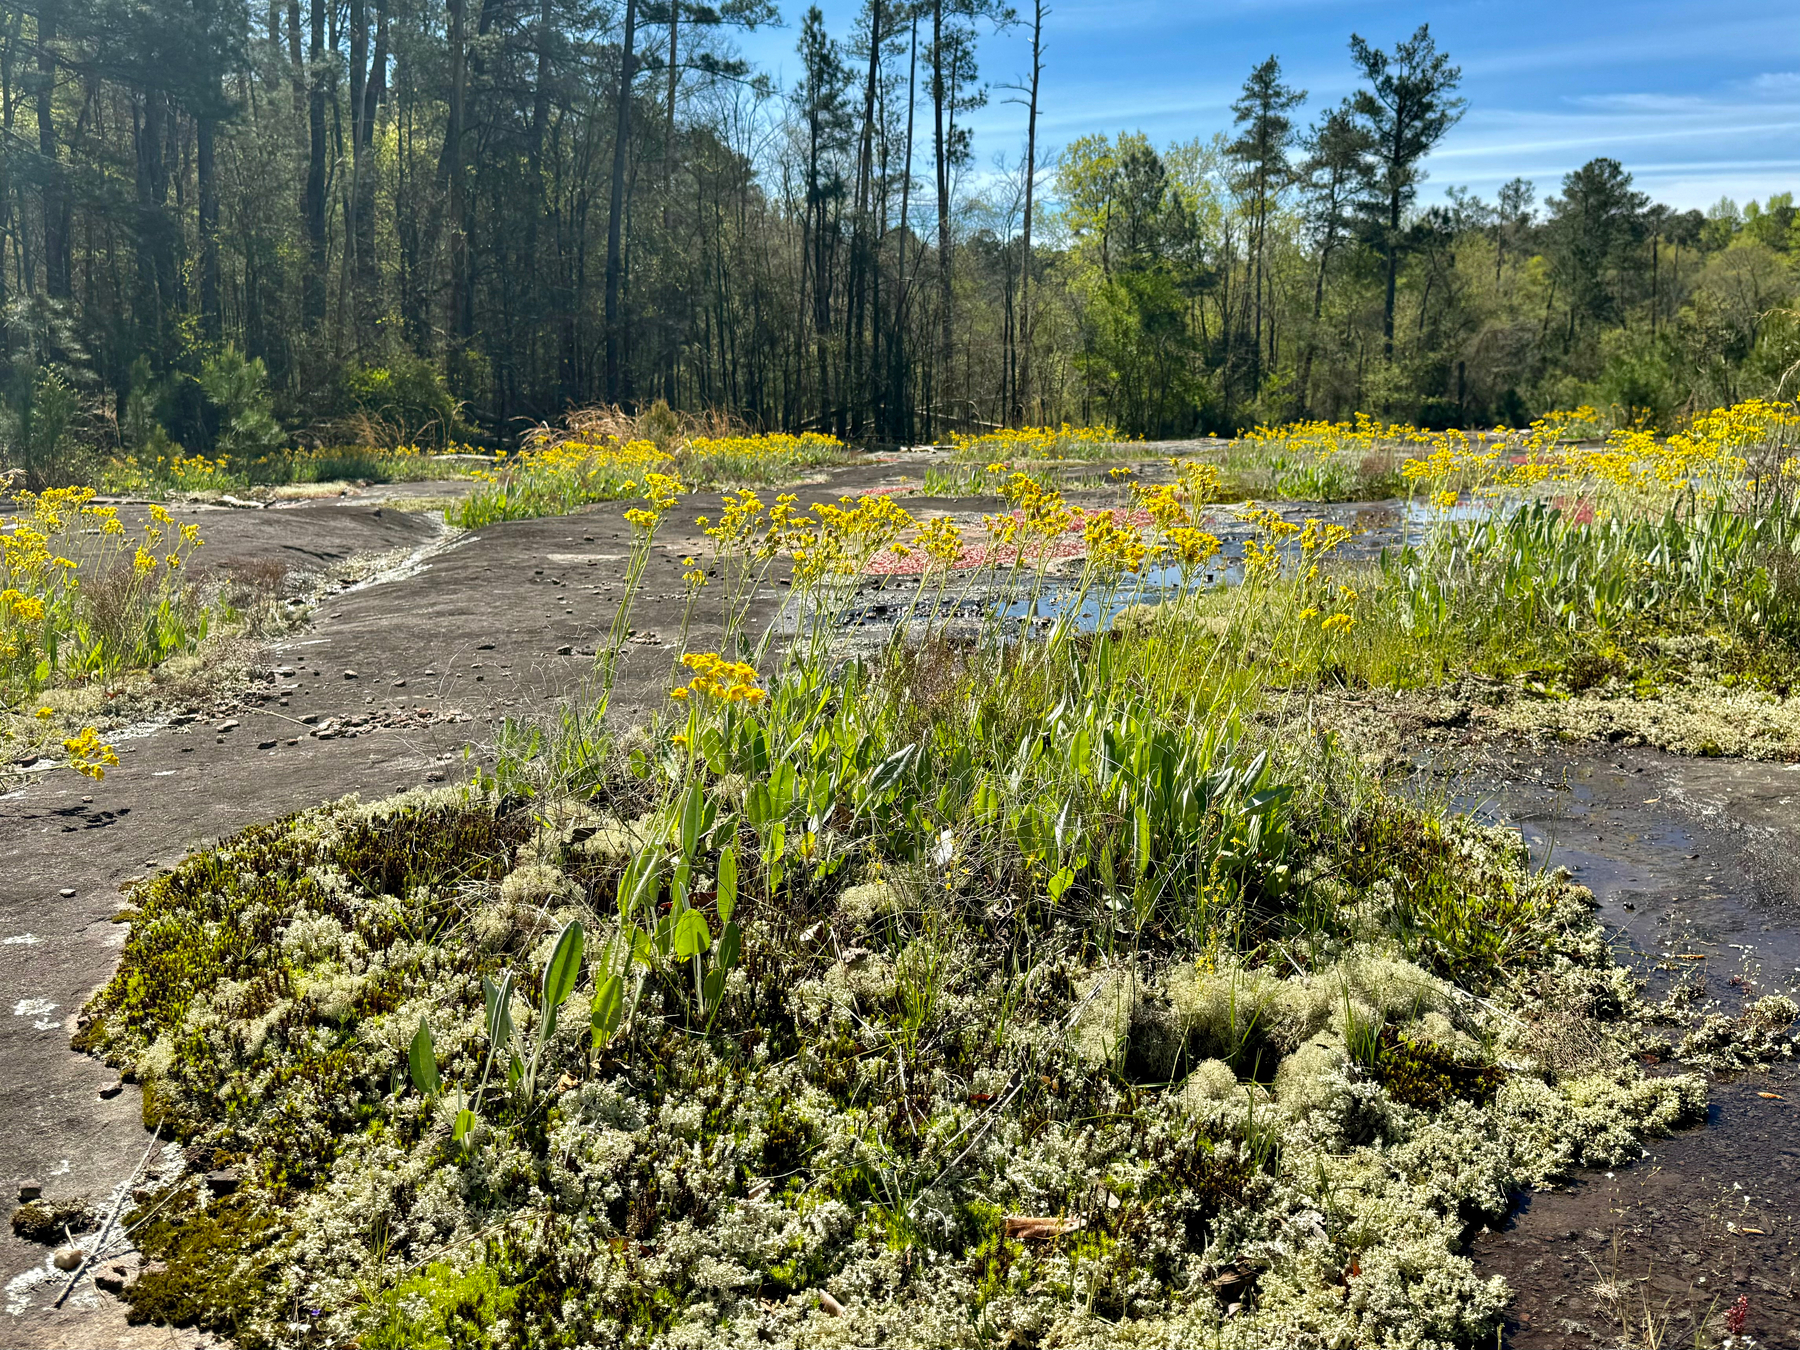 A natural landscape showcasing a variety of wildflowers in bloom on rocky ground, with a pond in the background surrounded by forest under a clear blue sky.